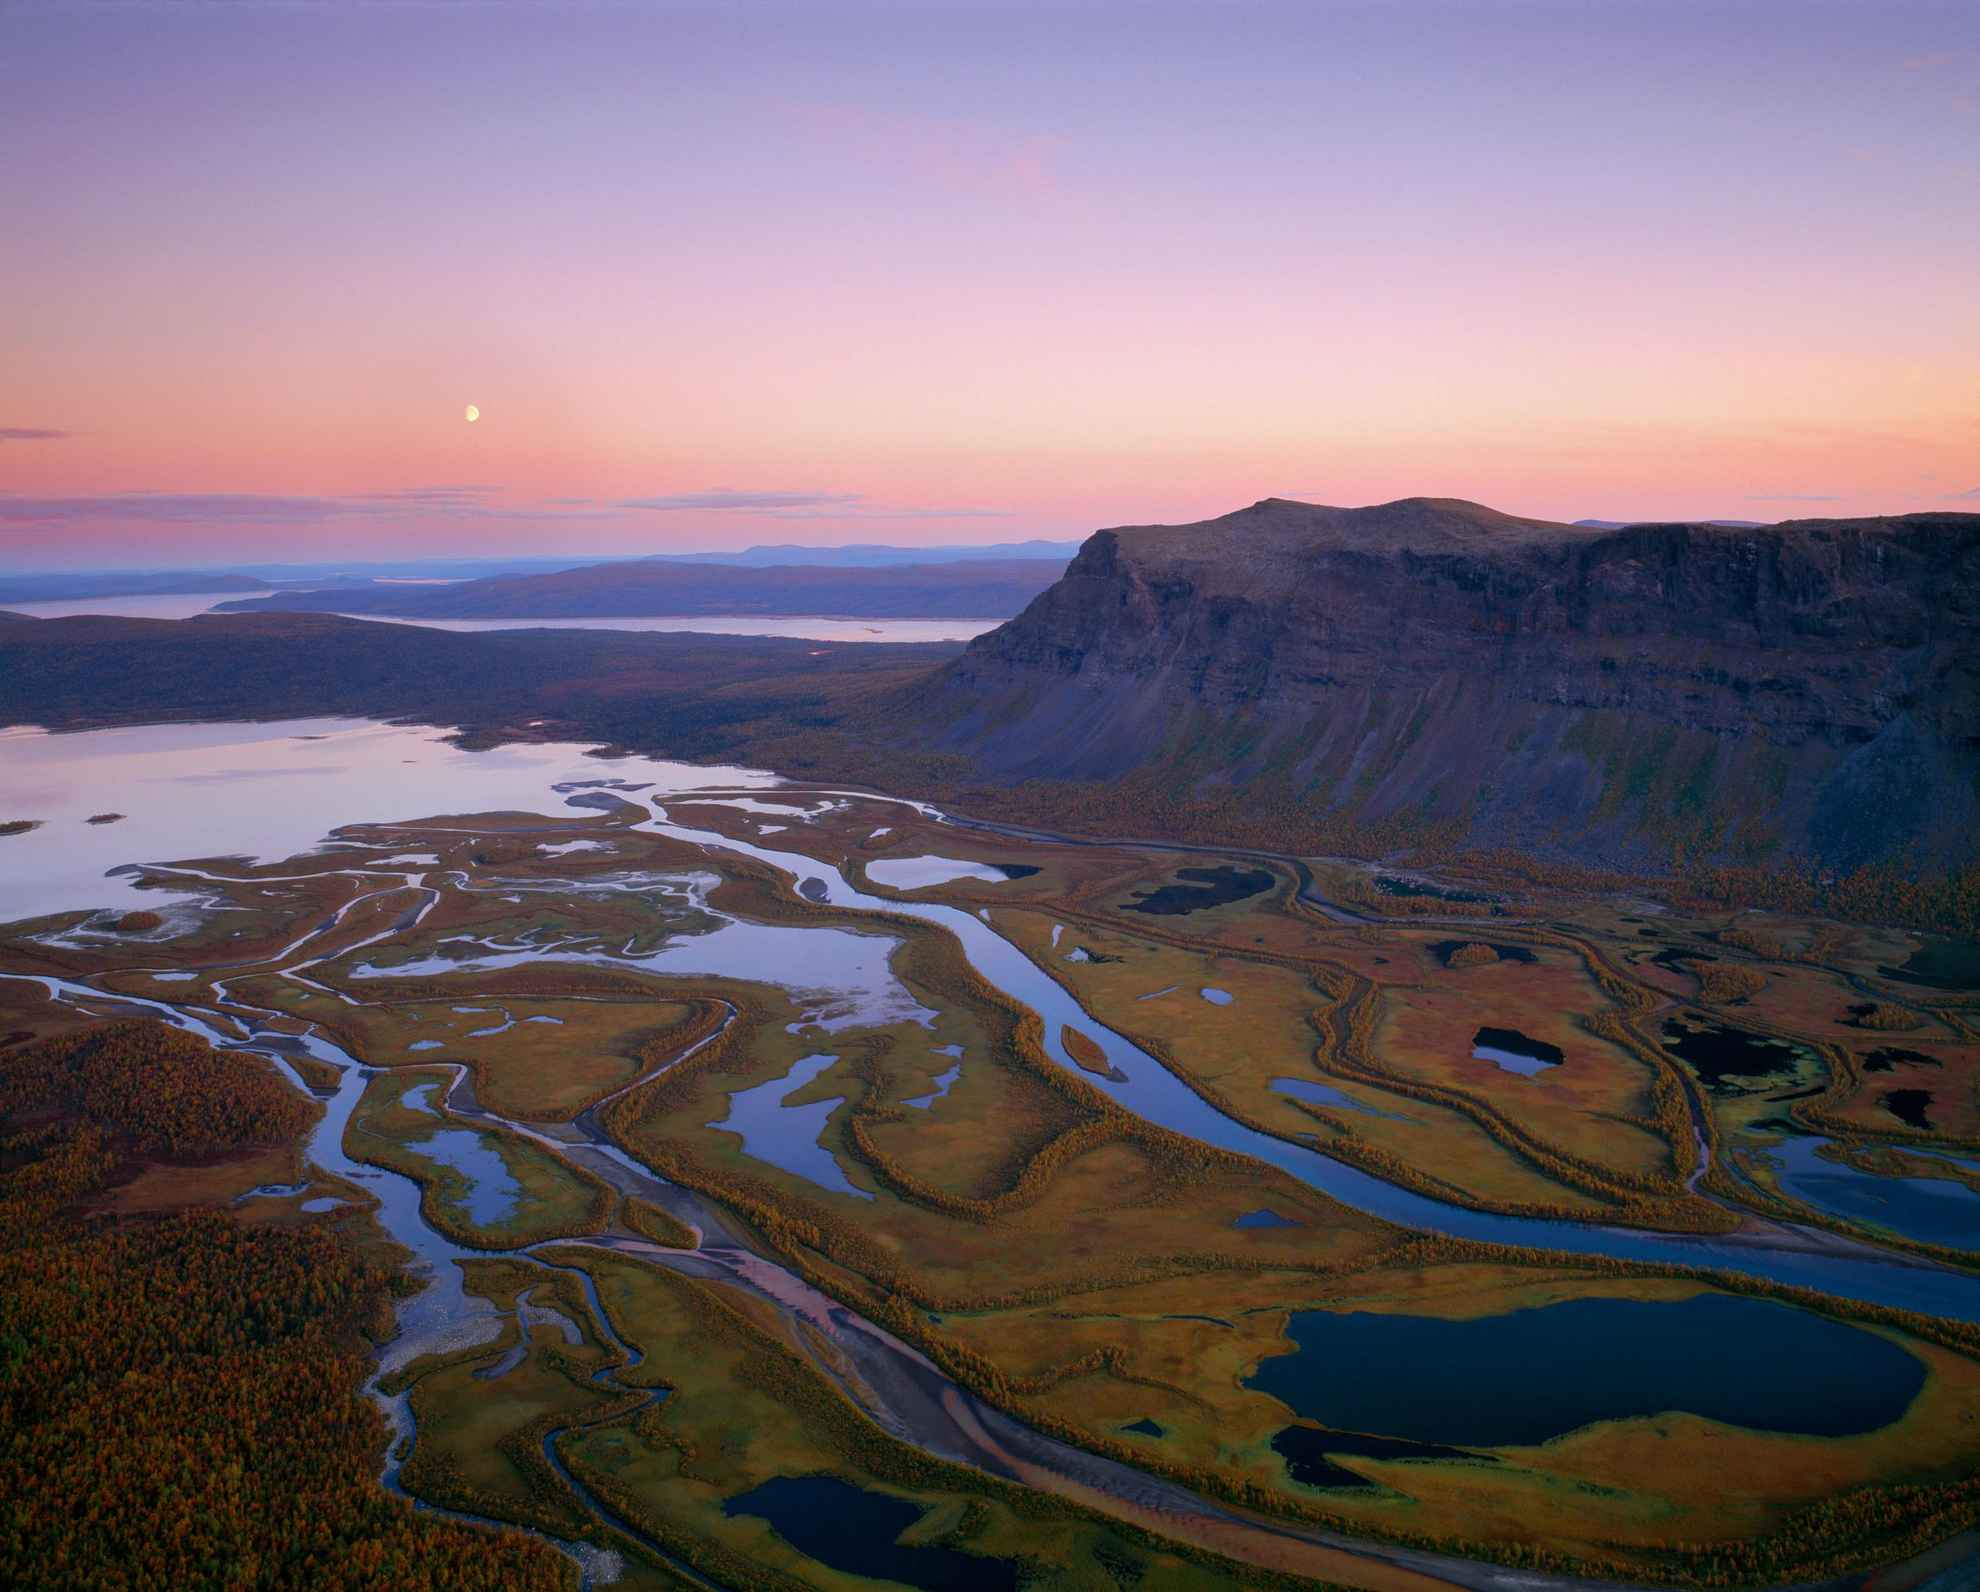 Aerial view of Rapadalen valley and the surrounding mountains of Sarek National Park during twilight.